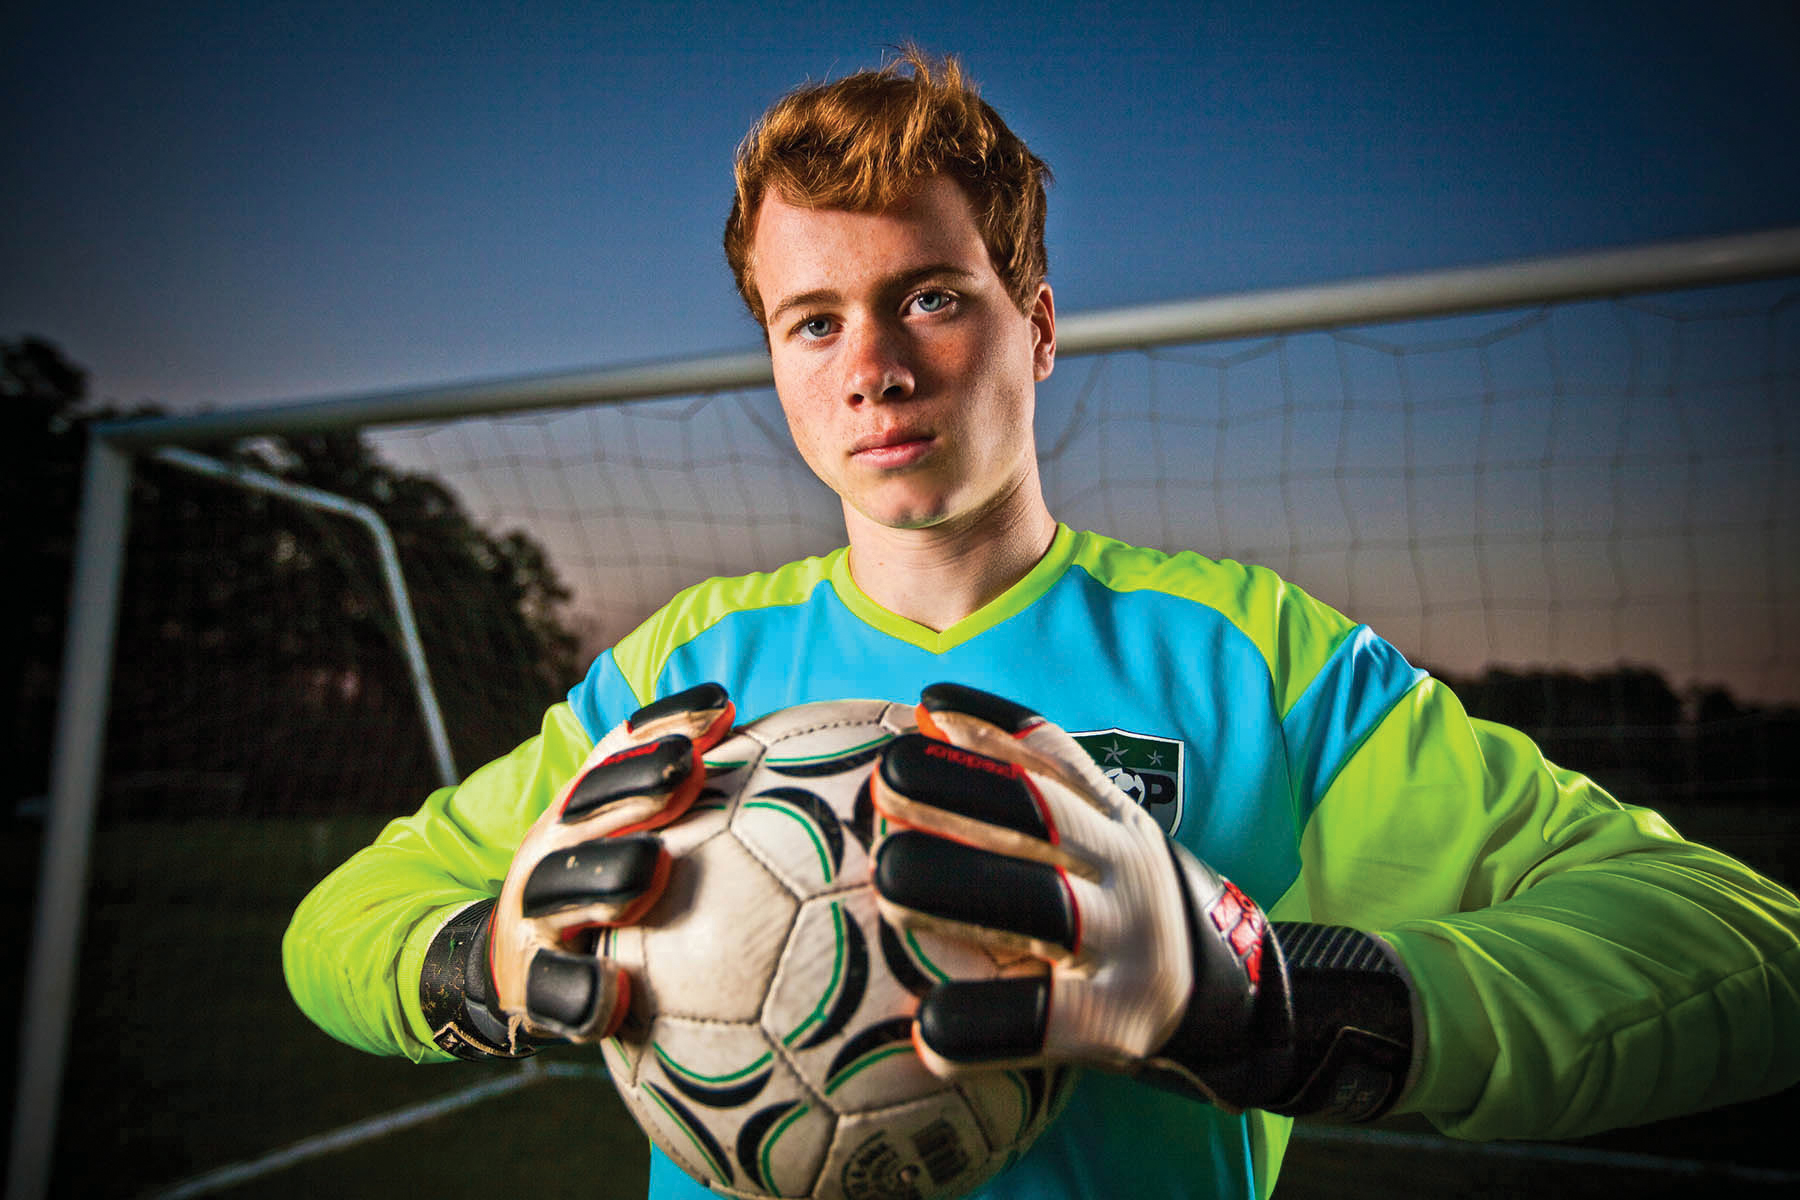 Photo of a high school senior boy posed with a soccer ball in front of a soccer net on the soccer field taken by wedding photographers in Baltimore ARWhite Photography (Copy)